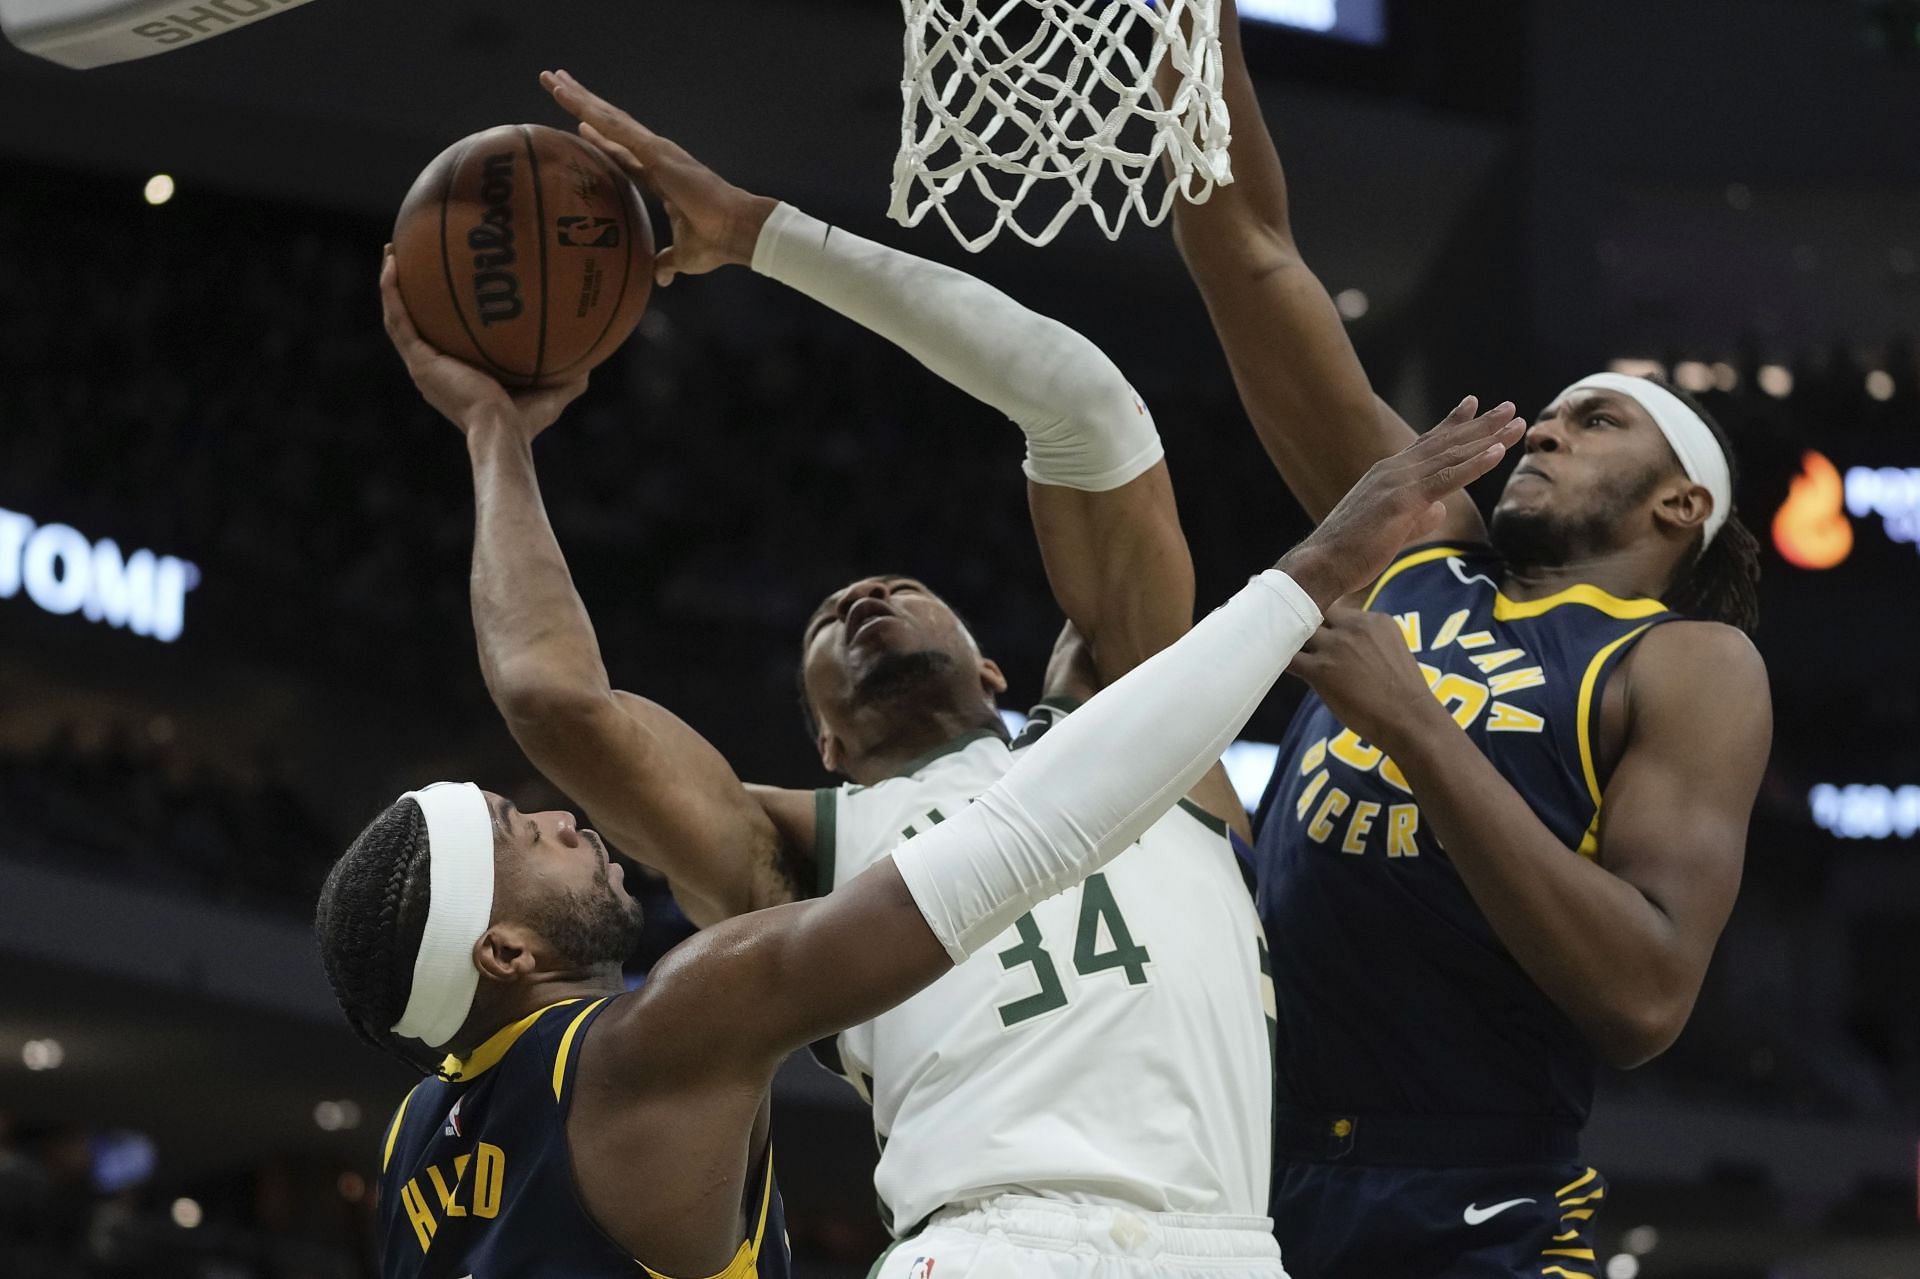 Giannis Antetokounmpo of the Milwaukee Bucks against the Indiana Pacers